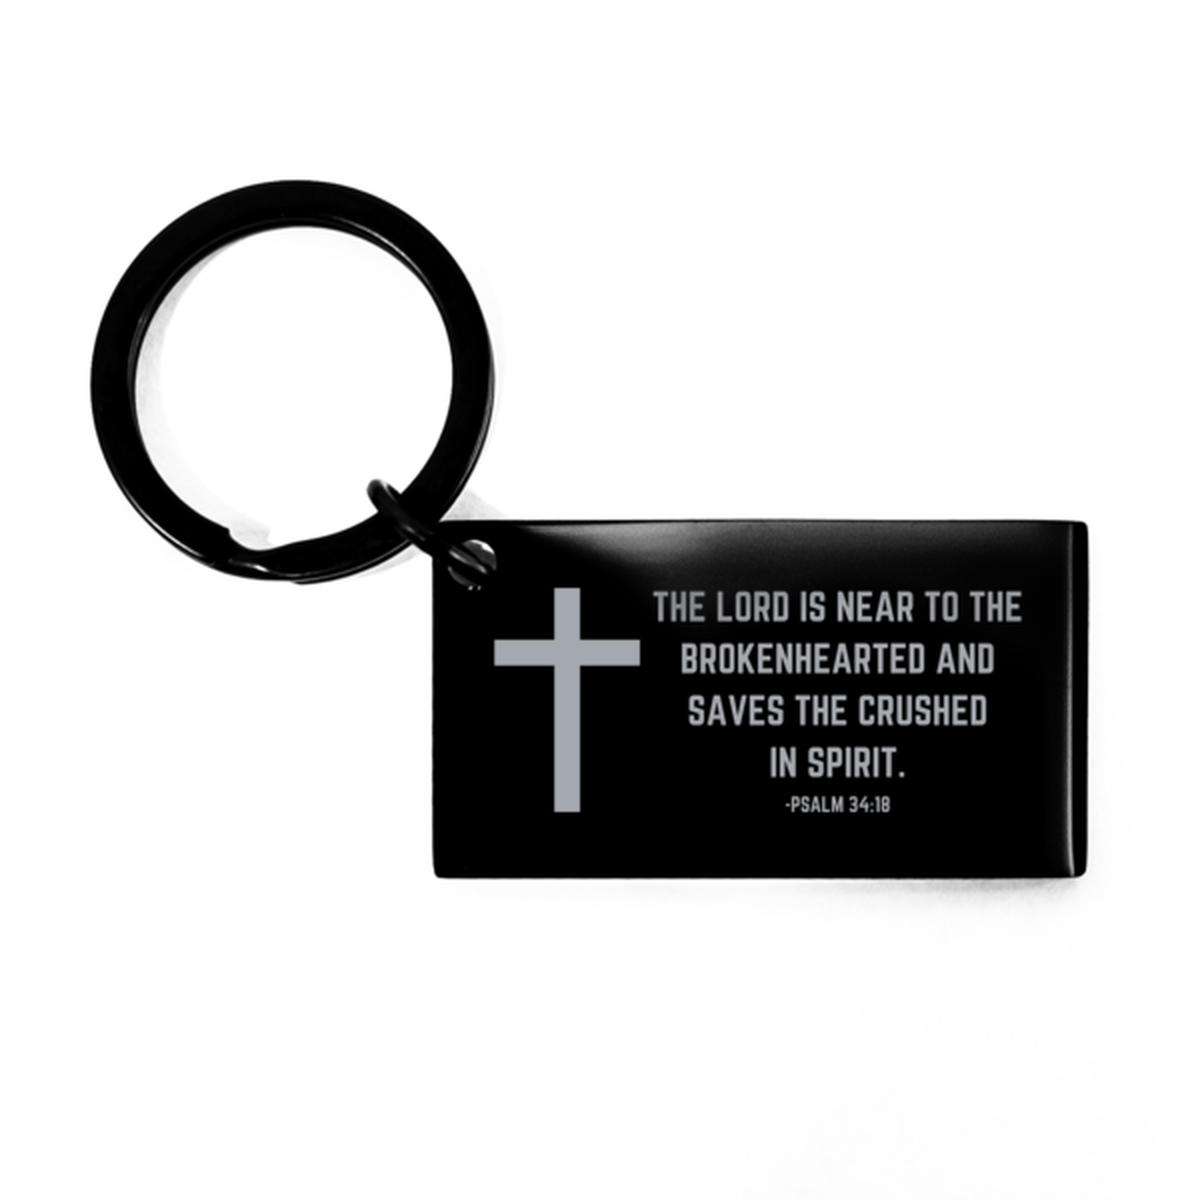 Baptism Gifts For Teenage Boys Girls, Christian Bible Verse Black Keychain, The Lord is near to the brokenhearted, Confirmation Gifts, Bible Verse Keyring for Son, Godson, Grandson, Nephew